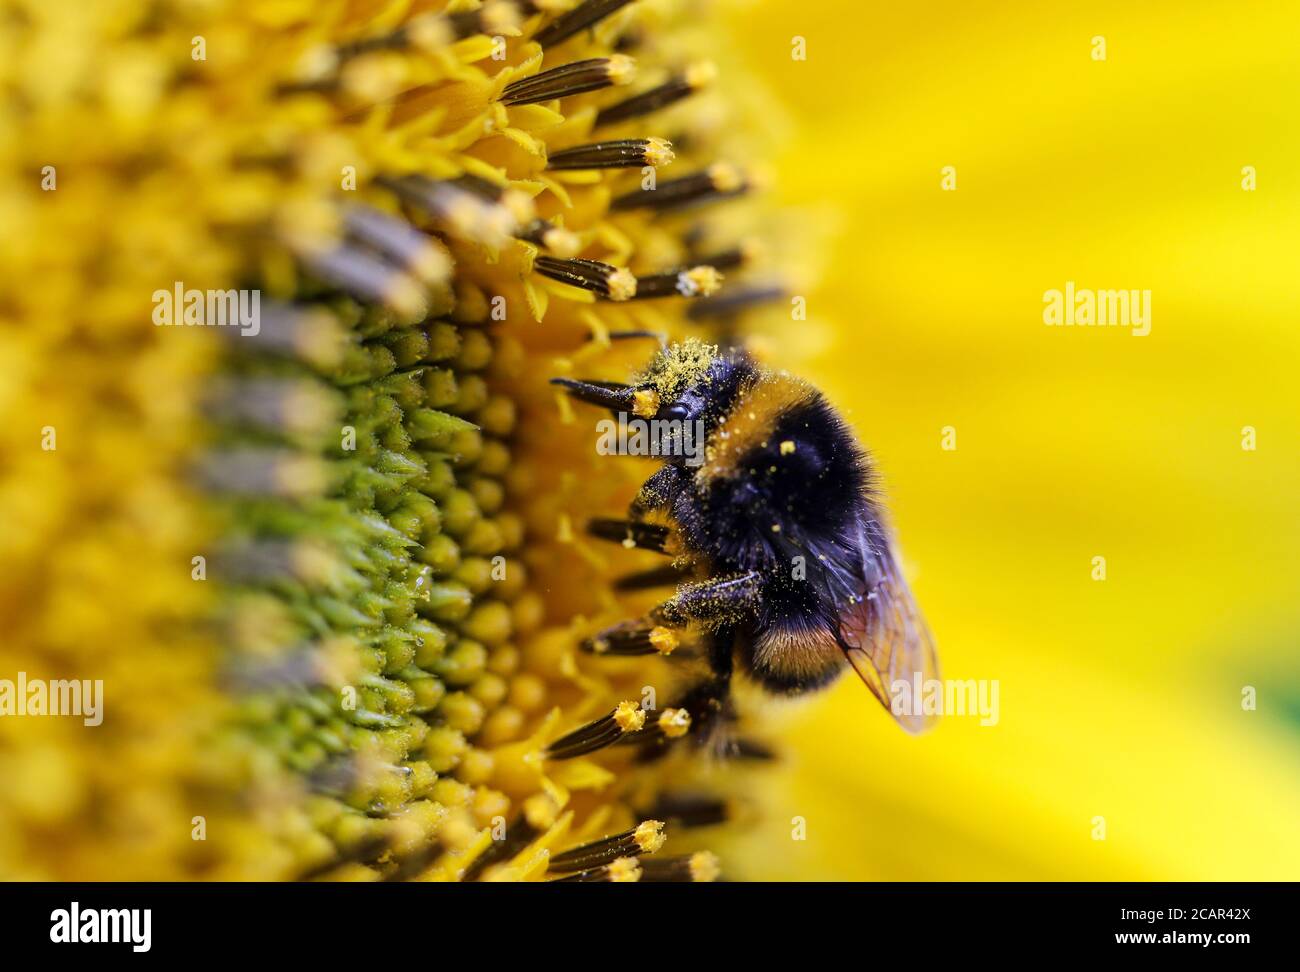 Bumblebee on a sunflower in the UK on a hot summer day Stock Photo